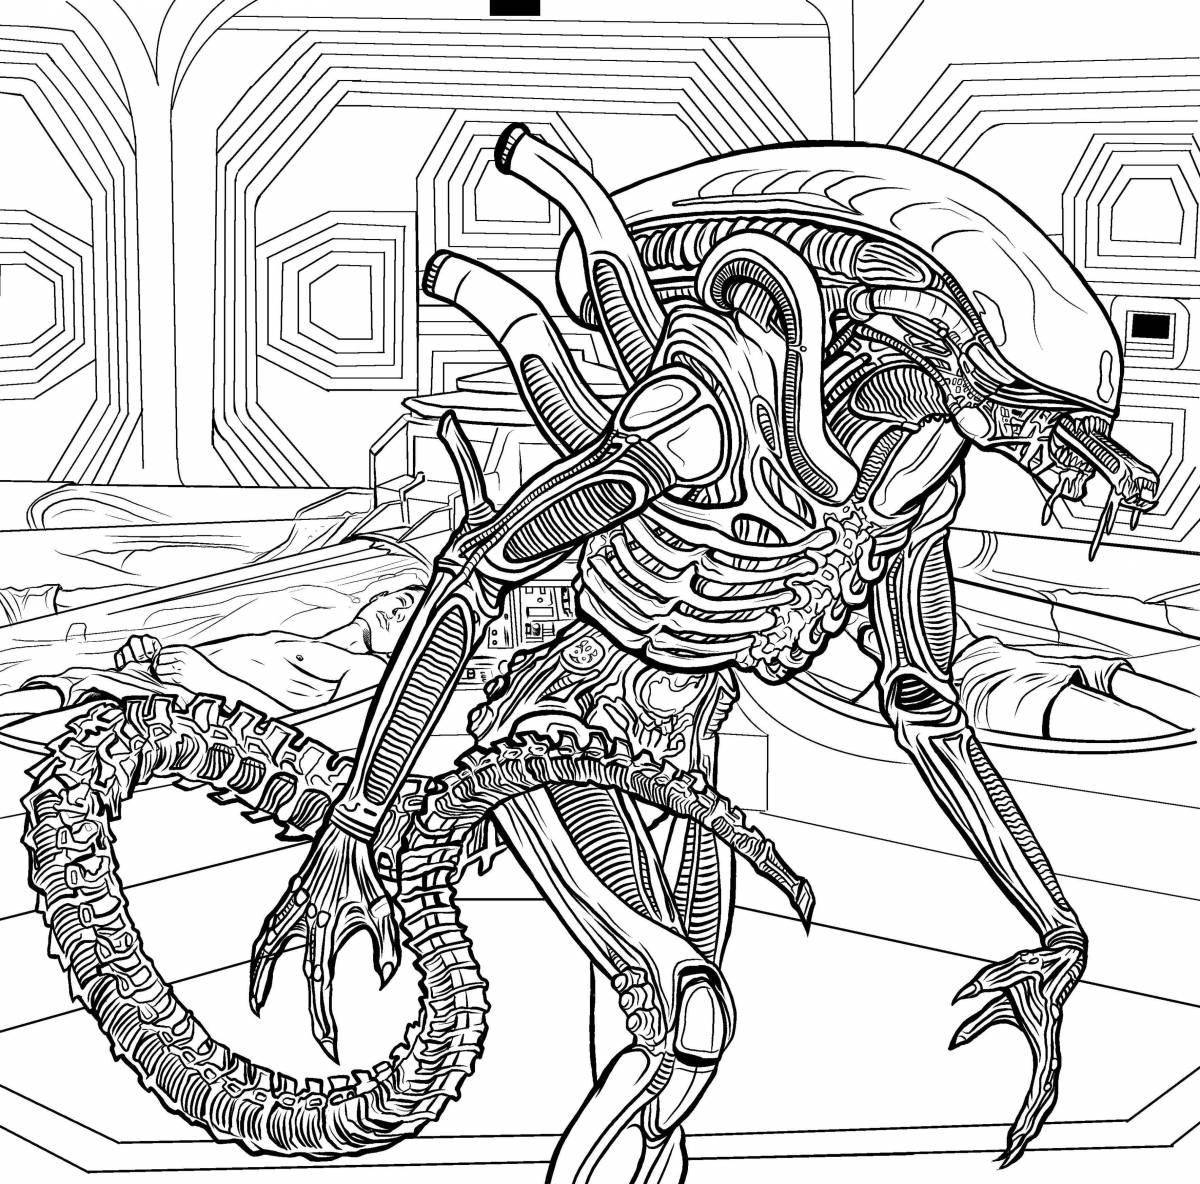 Intriguing siren head robot coloring page